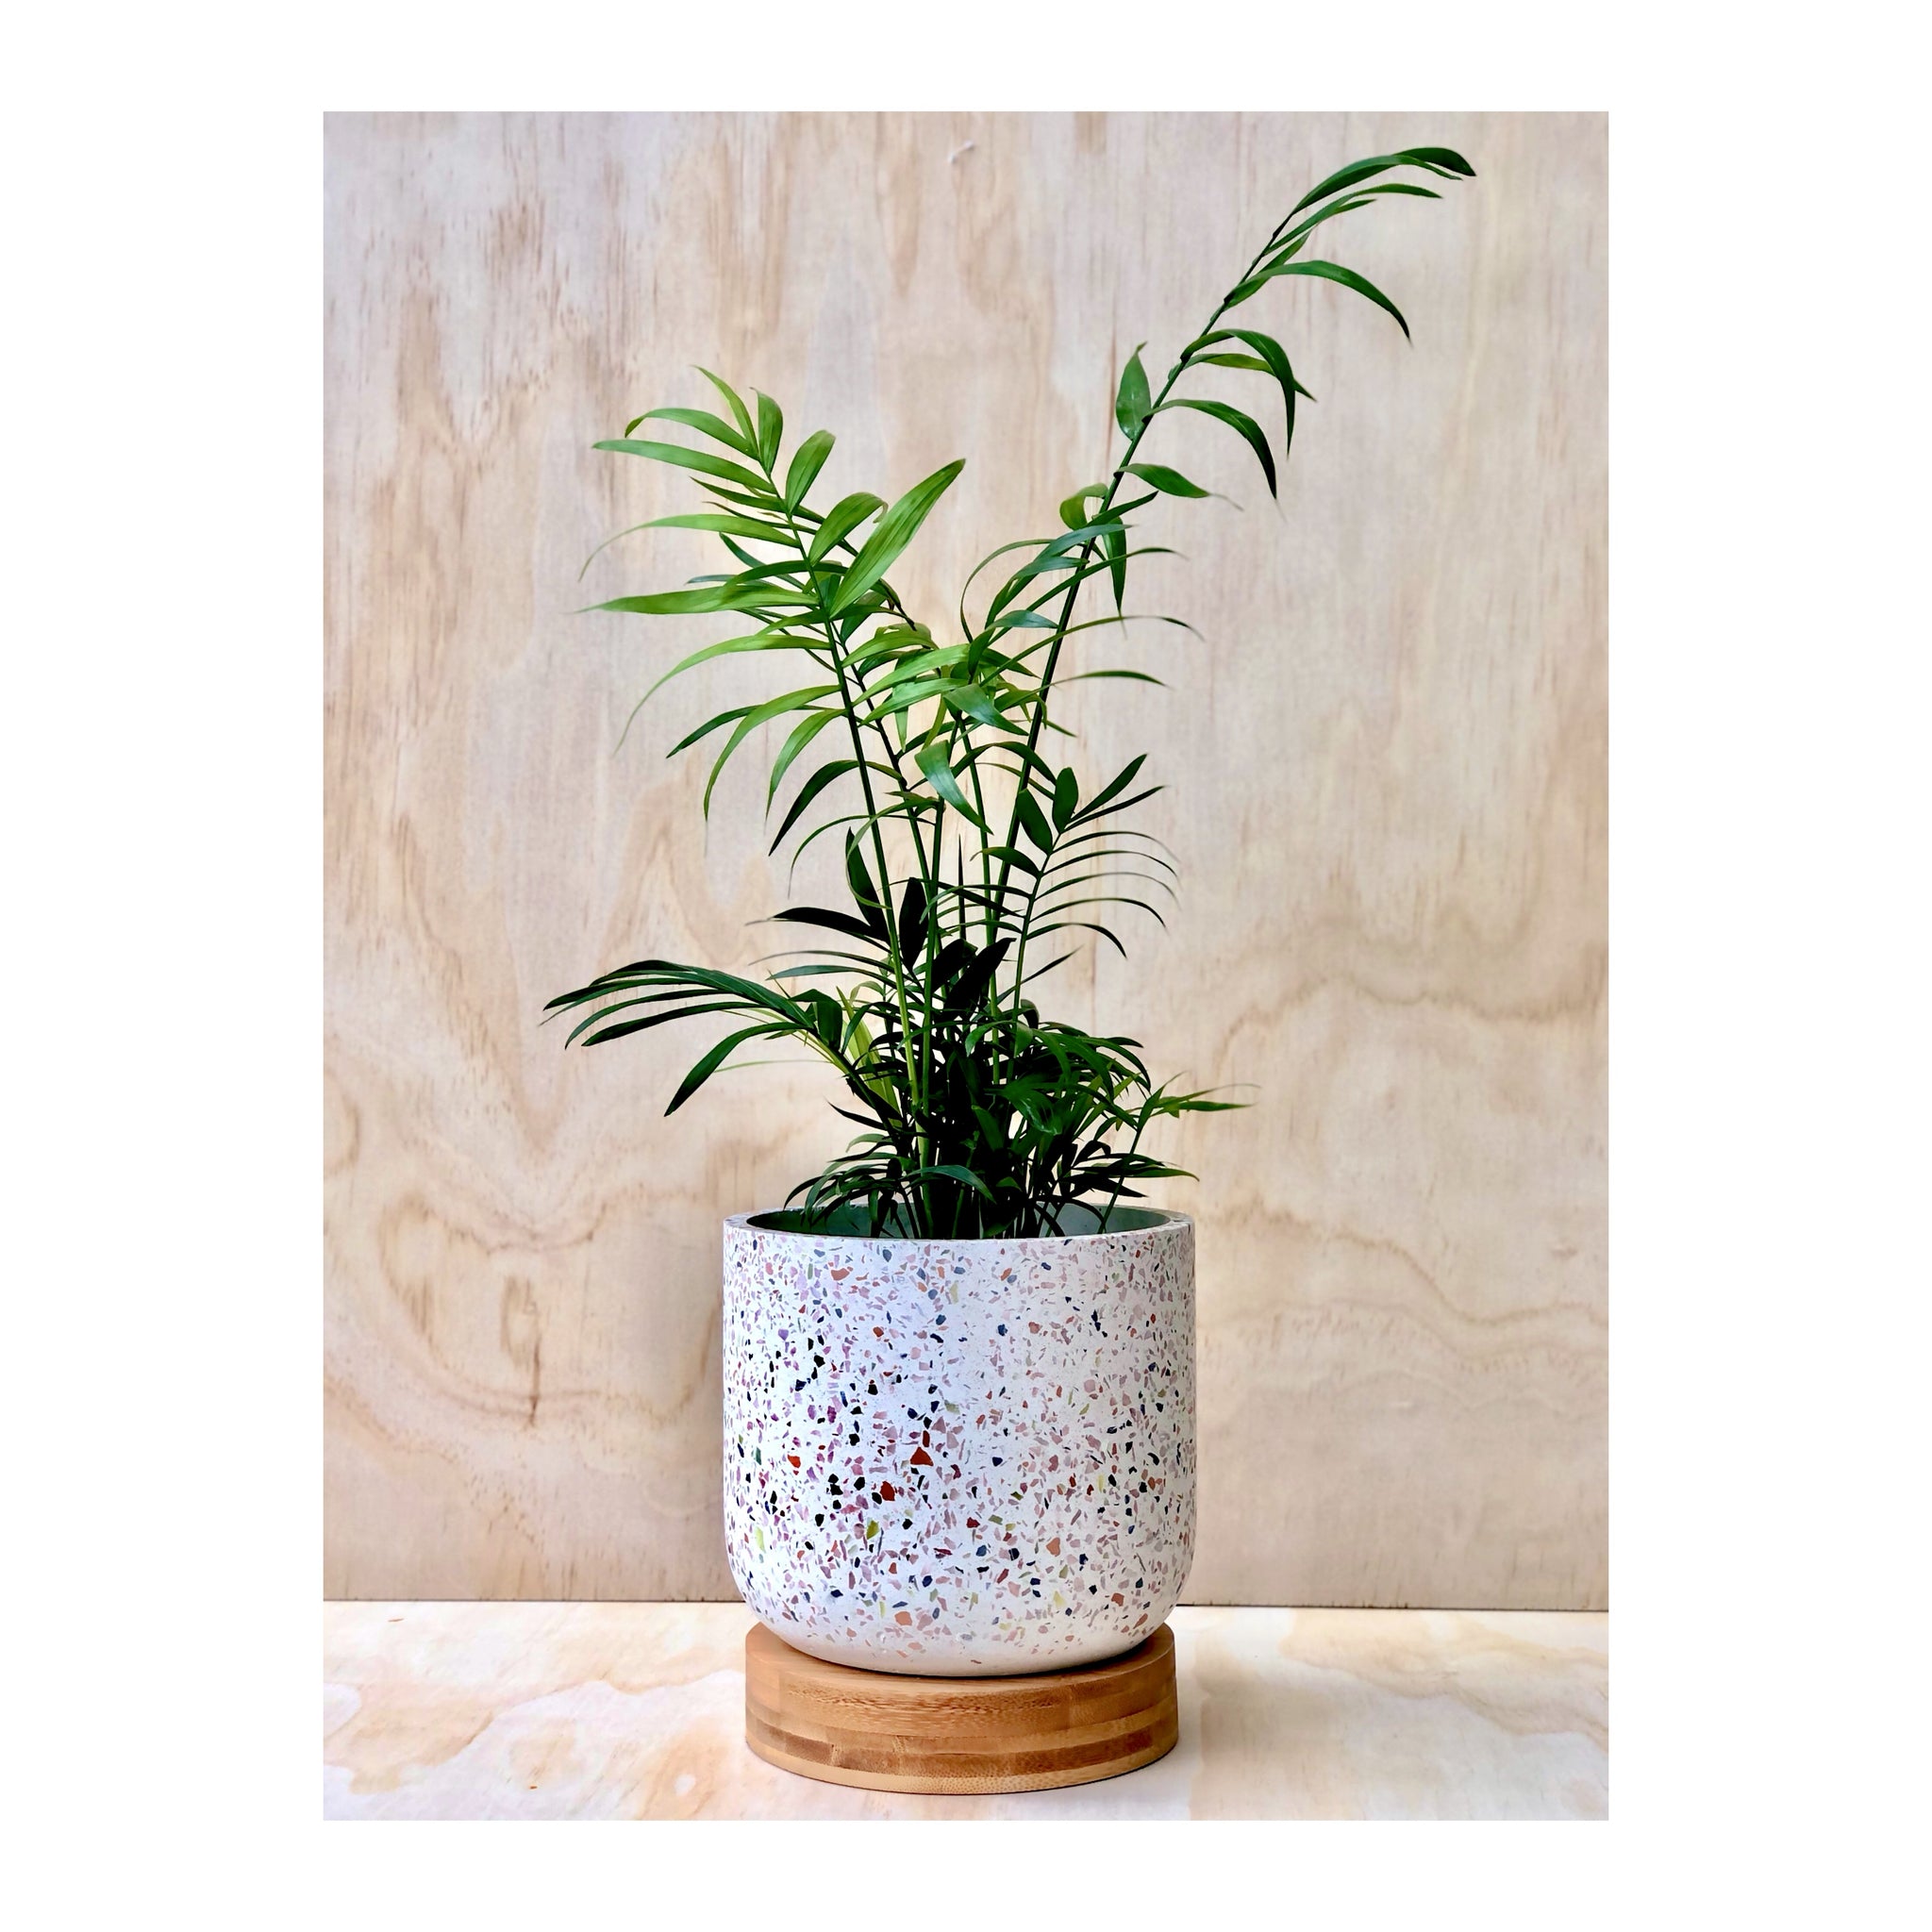 Parlour Palm (Chamaedorea Elegans) Plant paired with a Gianna Terrazzo Plant Pot on Bamboo Base